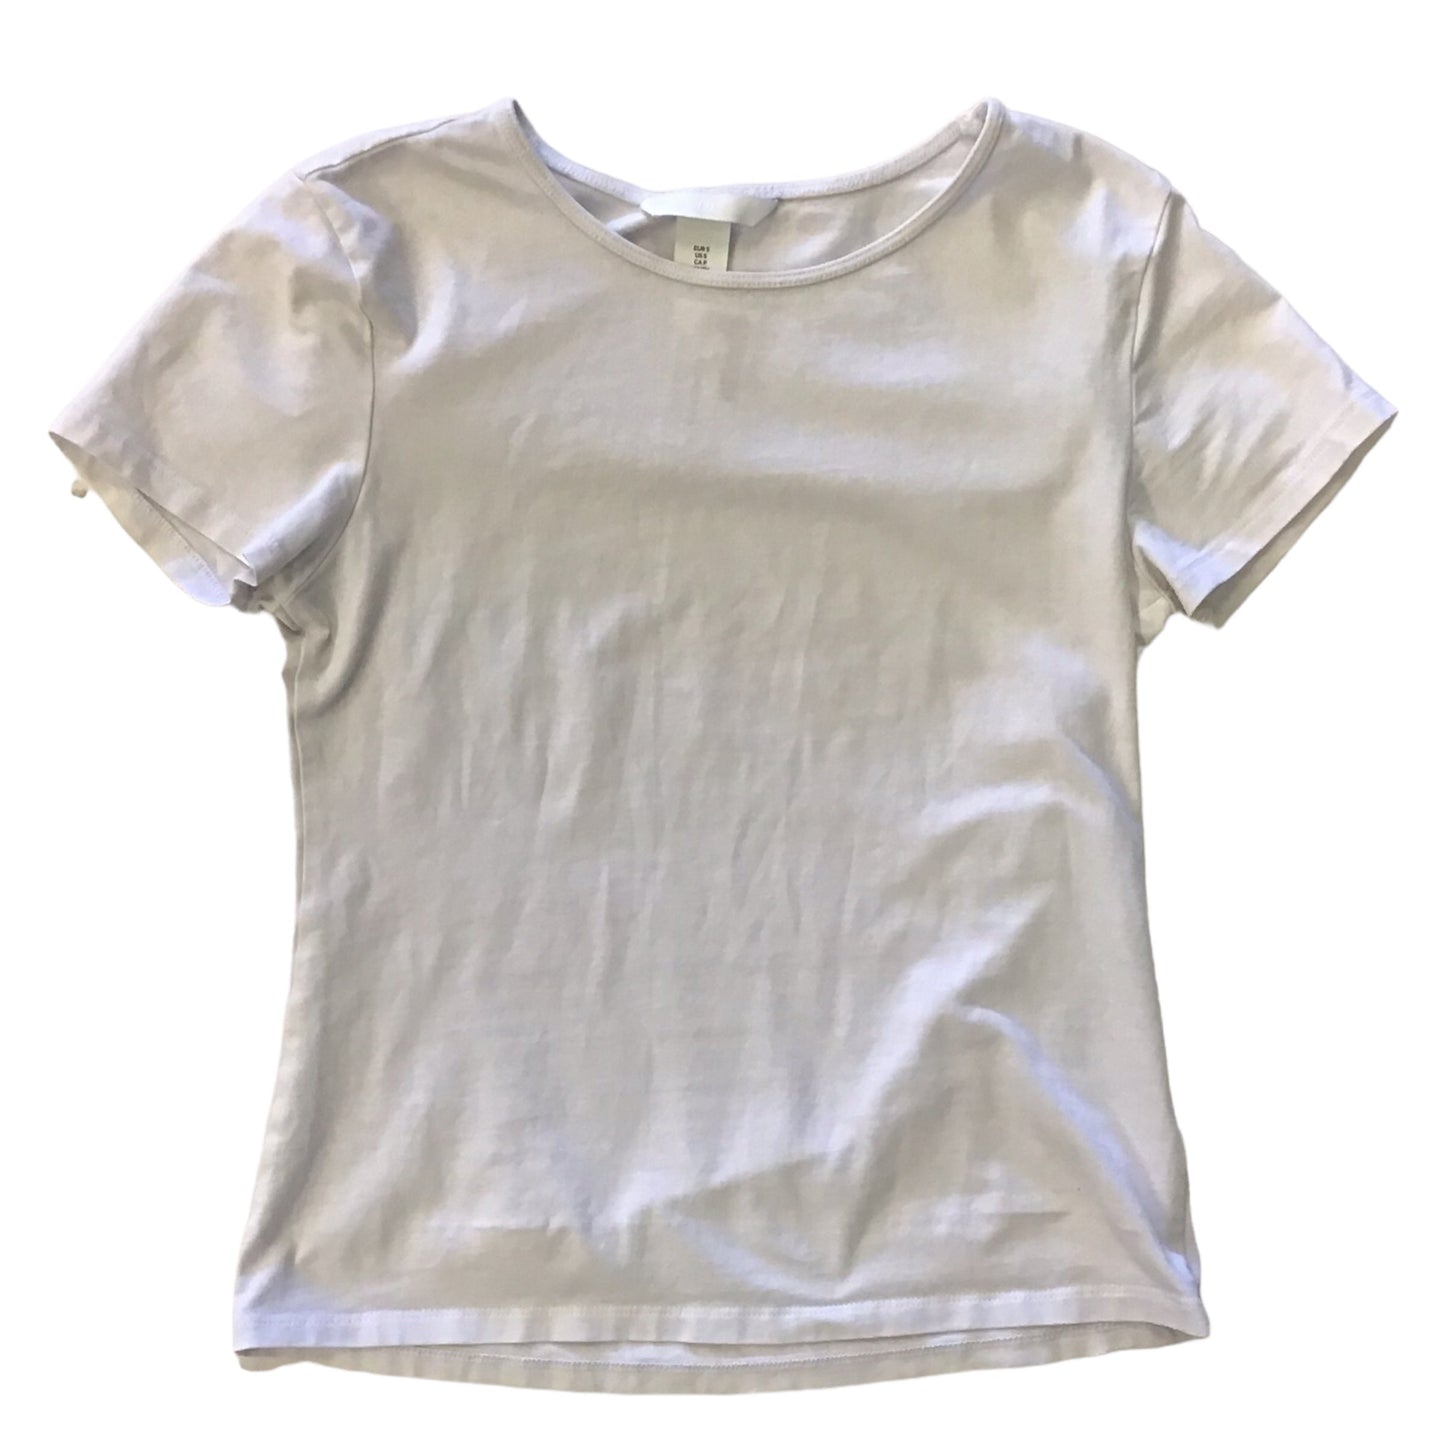 White Top Short Sleeve H&m, Size S